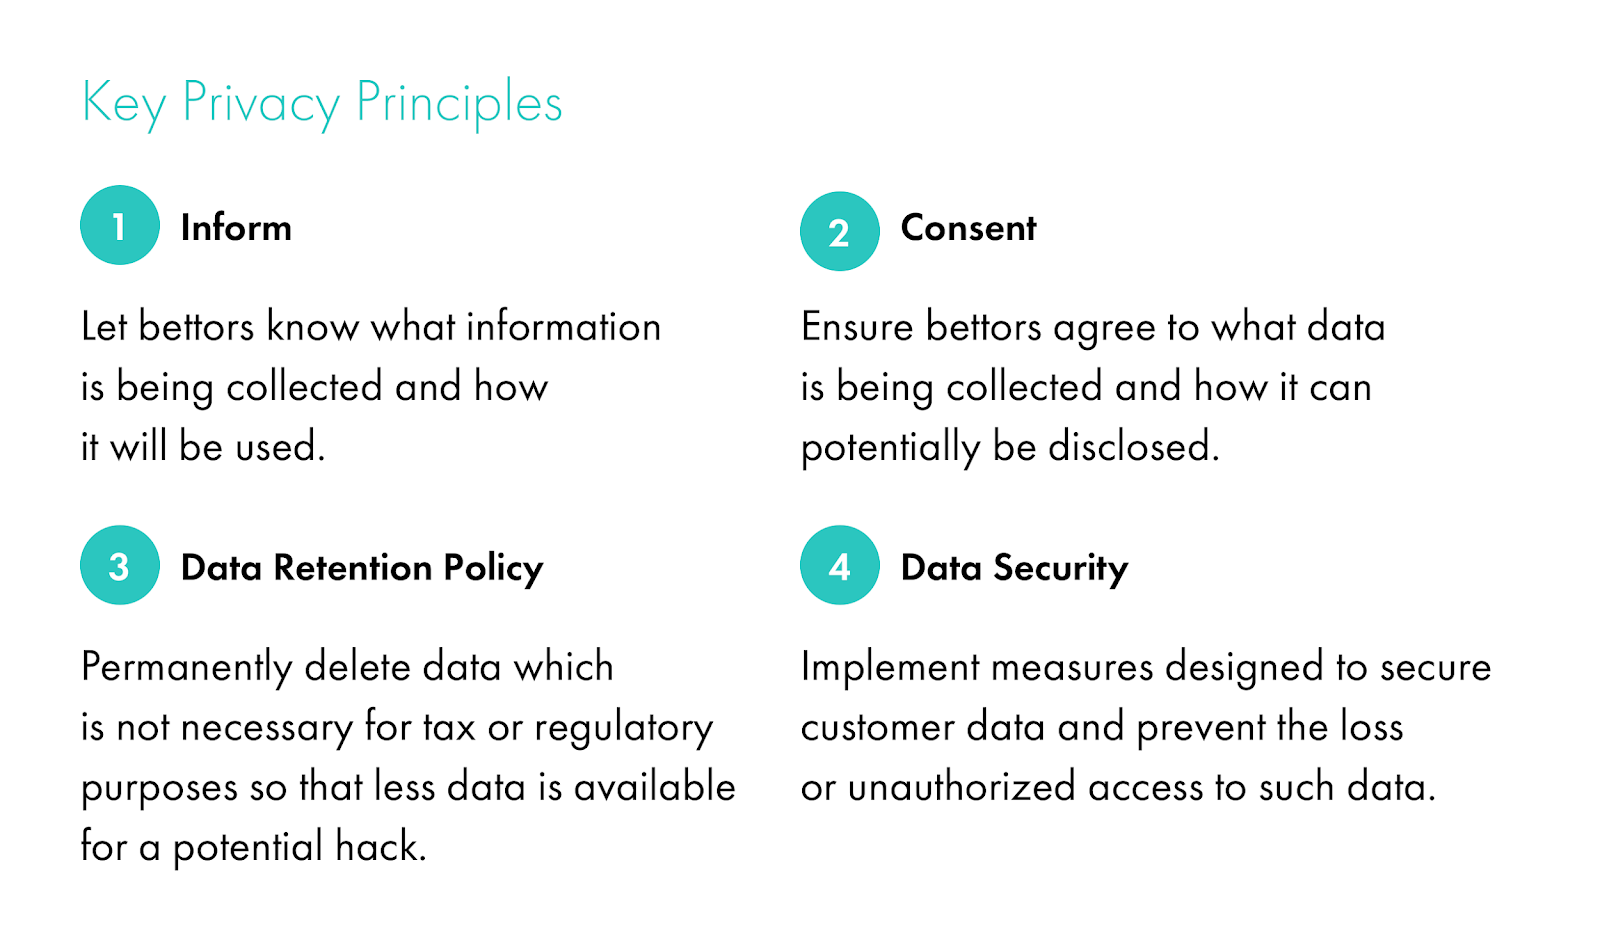 The four key principles of Data security